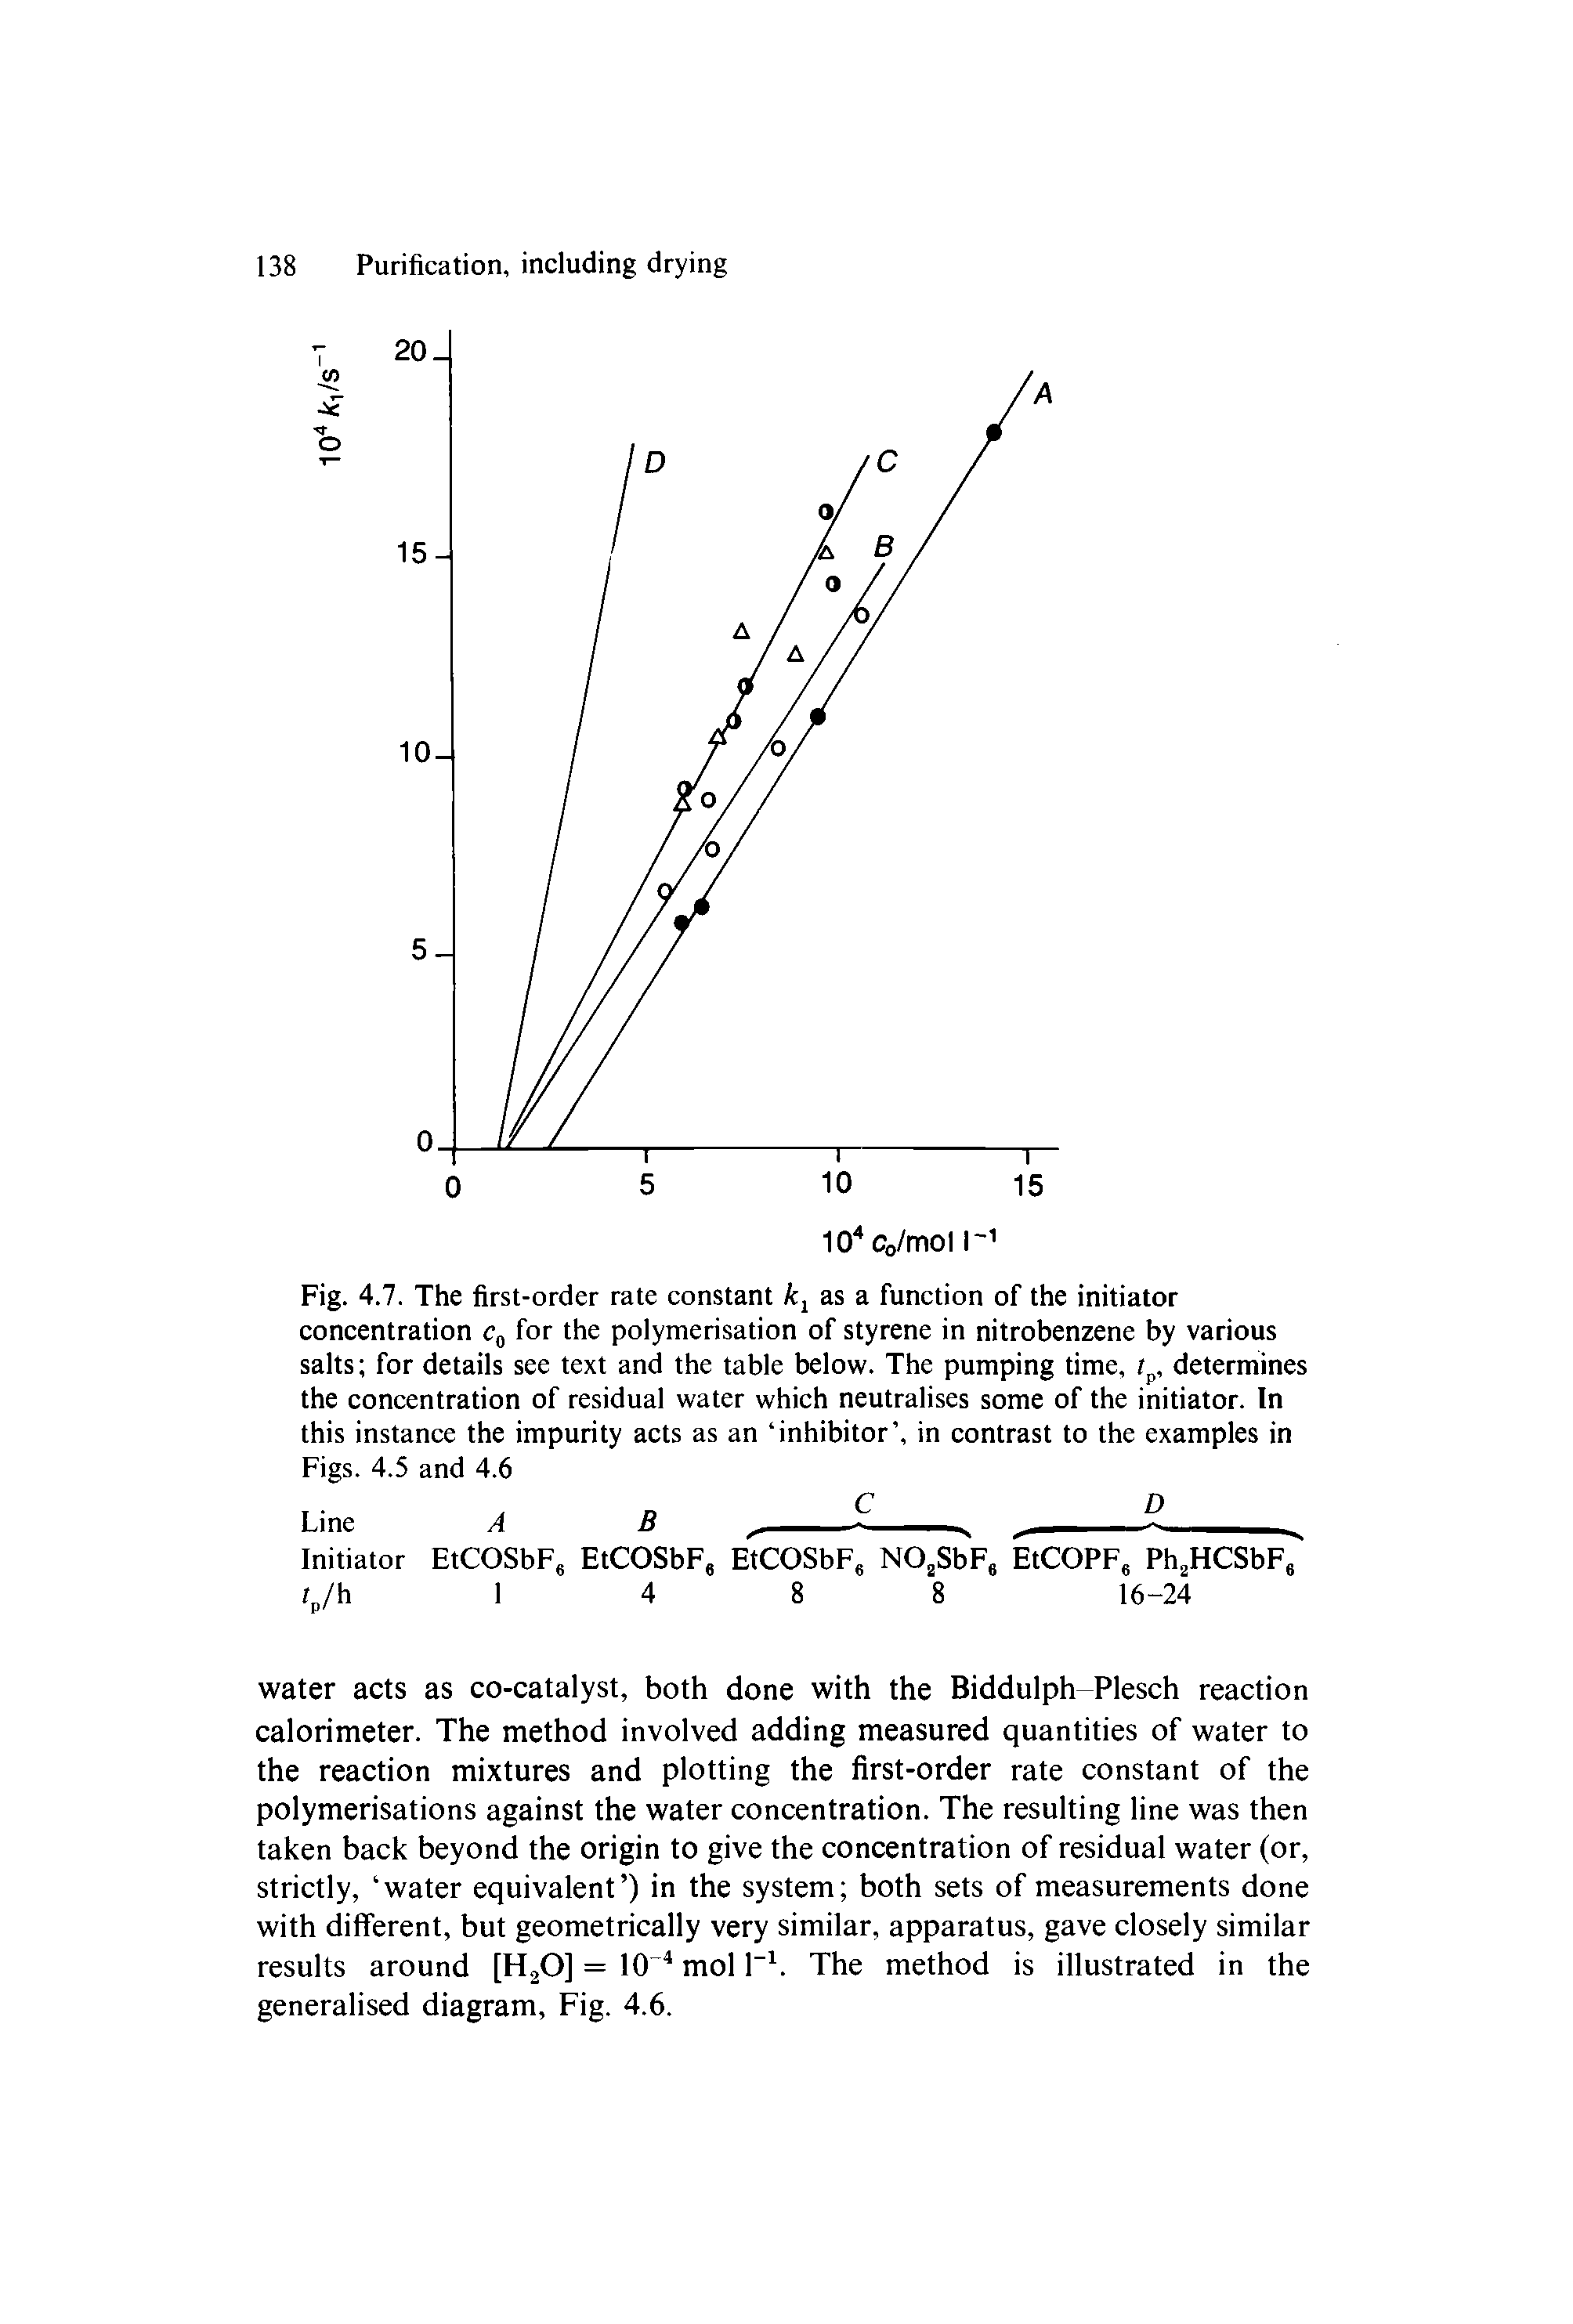 Fig. 4.7. The first-order rate constant as a function of the initiator concentration for the polymerisation of styrene in nitrobenzene by various salts for details see text and the table below. The pumping time, /p, determines the concentration of residual water which neutralises some of the initiator. In this instance the impurity acts as an inhibitor , in contrast to the examples in Figs. 4.5 and 4.6...